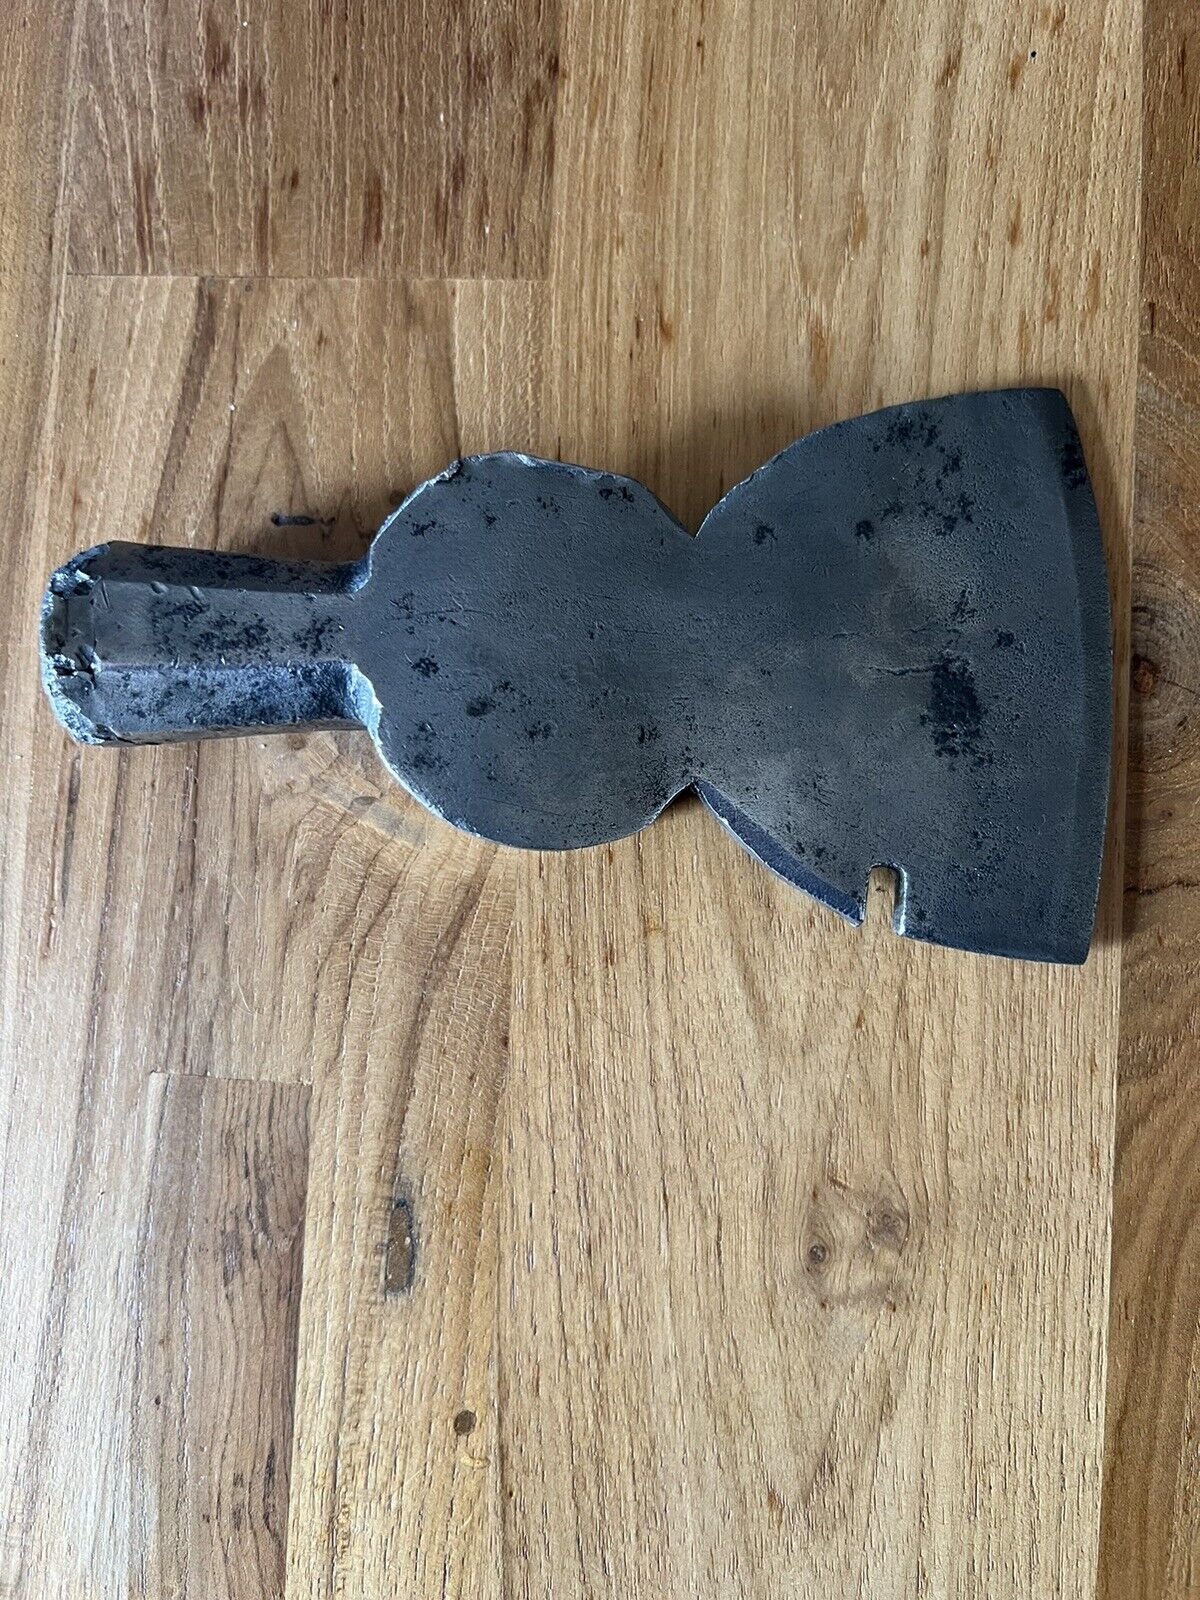 Antique Underhill Edge Tool Co. No. 1 Small Roofing Hatchet Hammer 1 pound